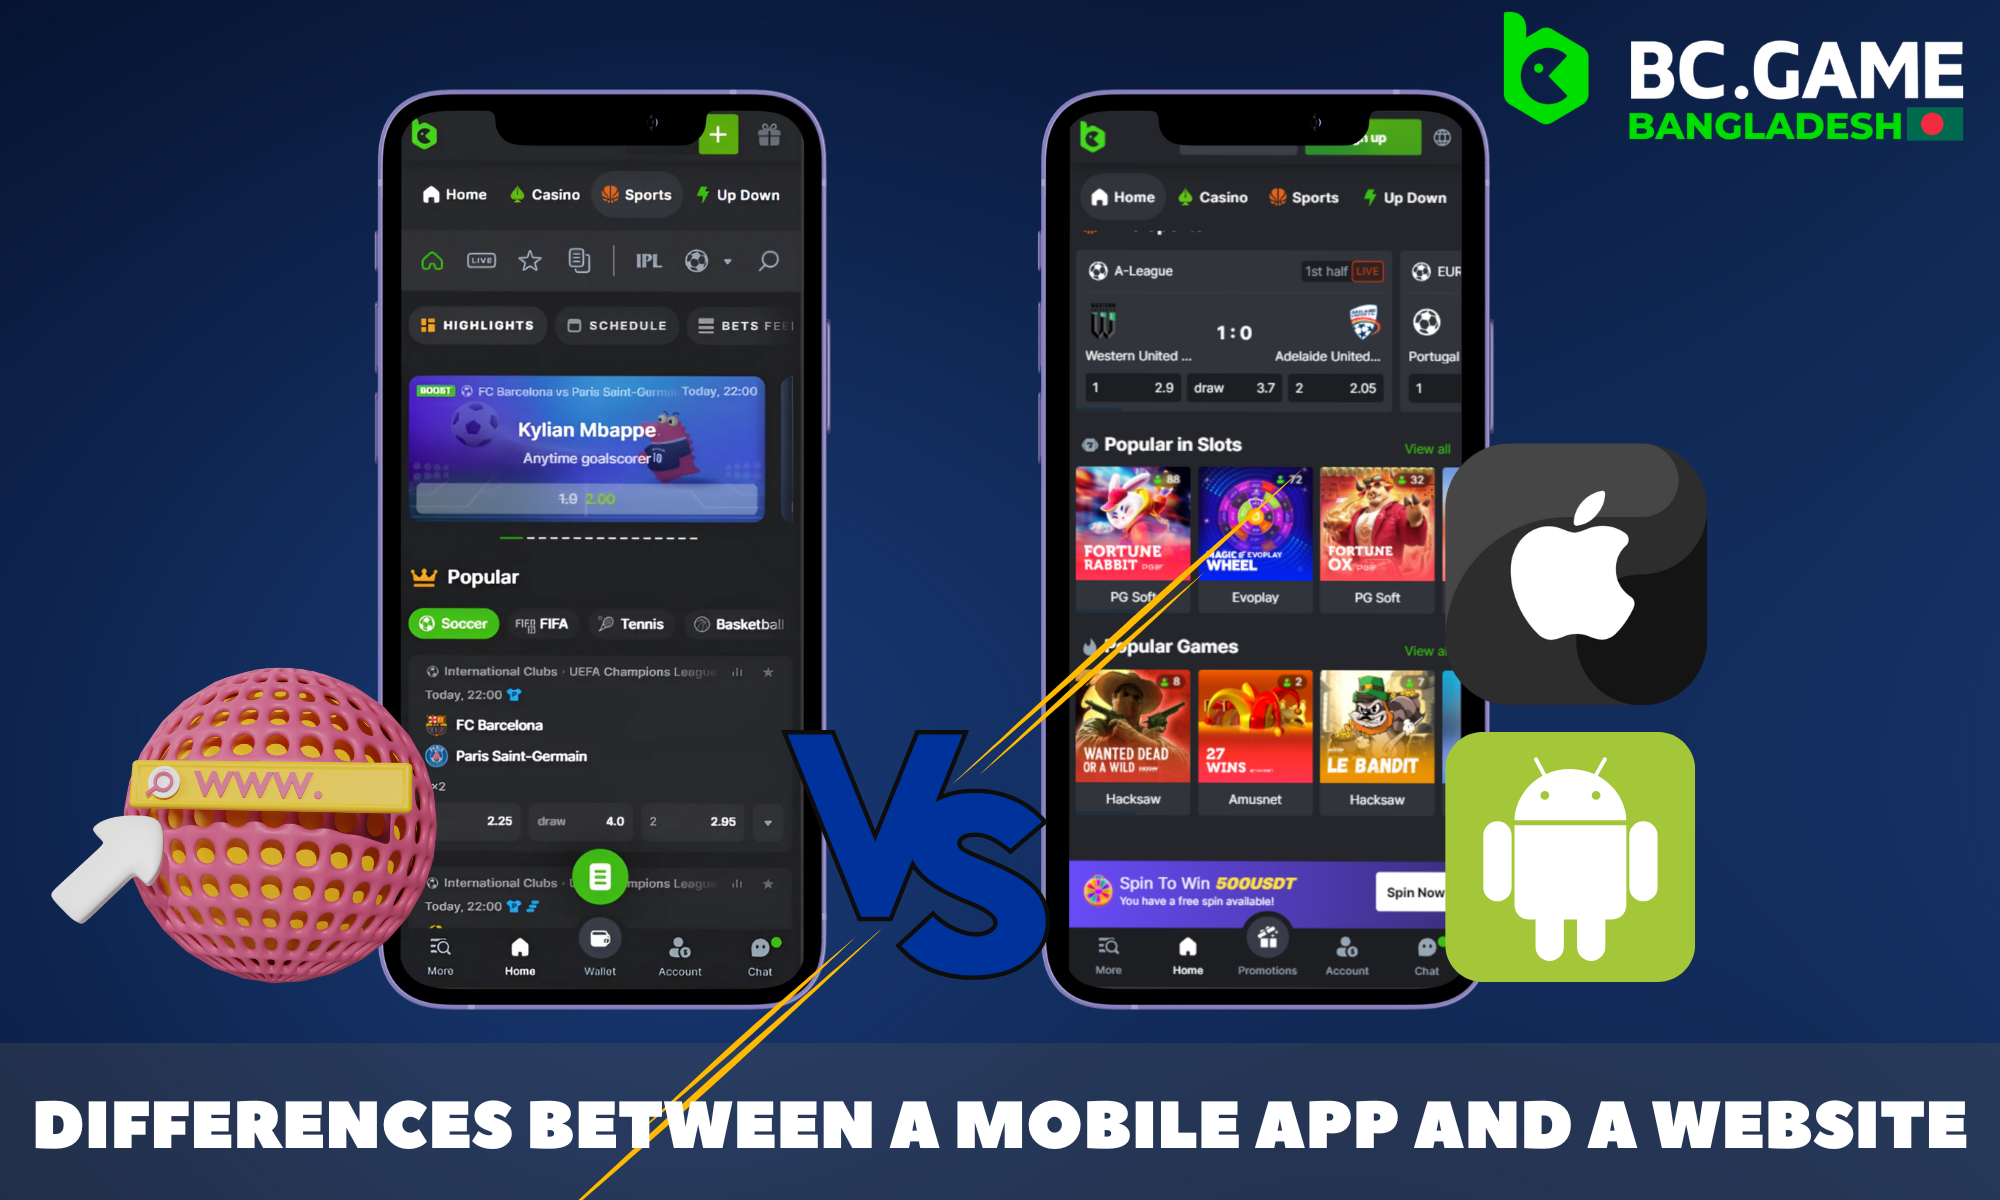 Comparison of the differences between the BC Game app and the website